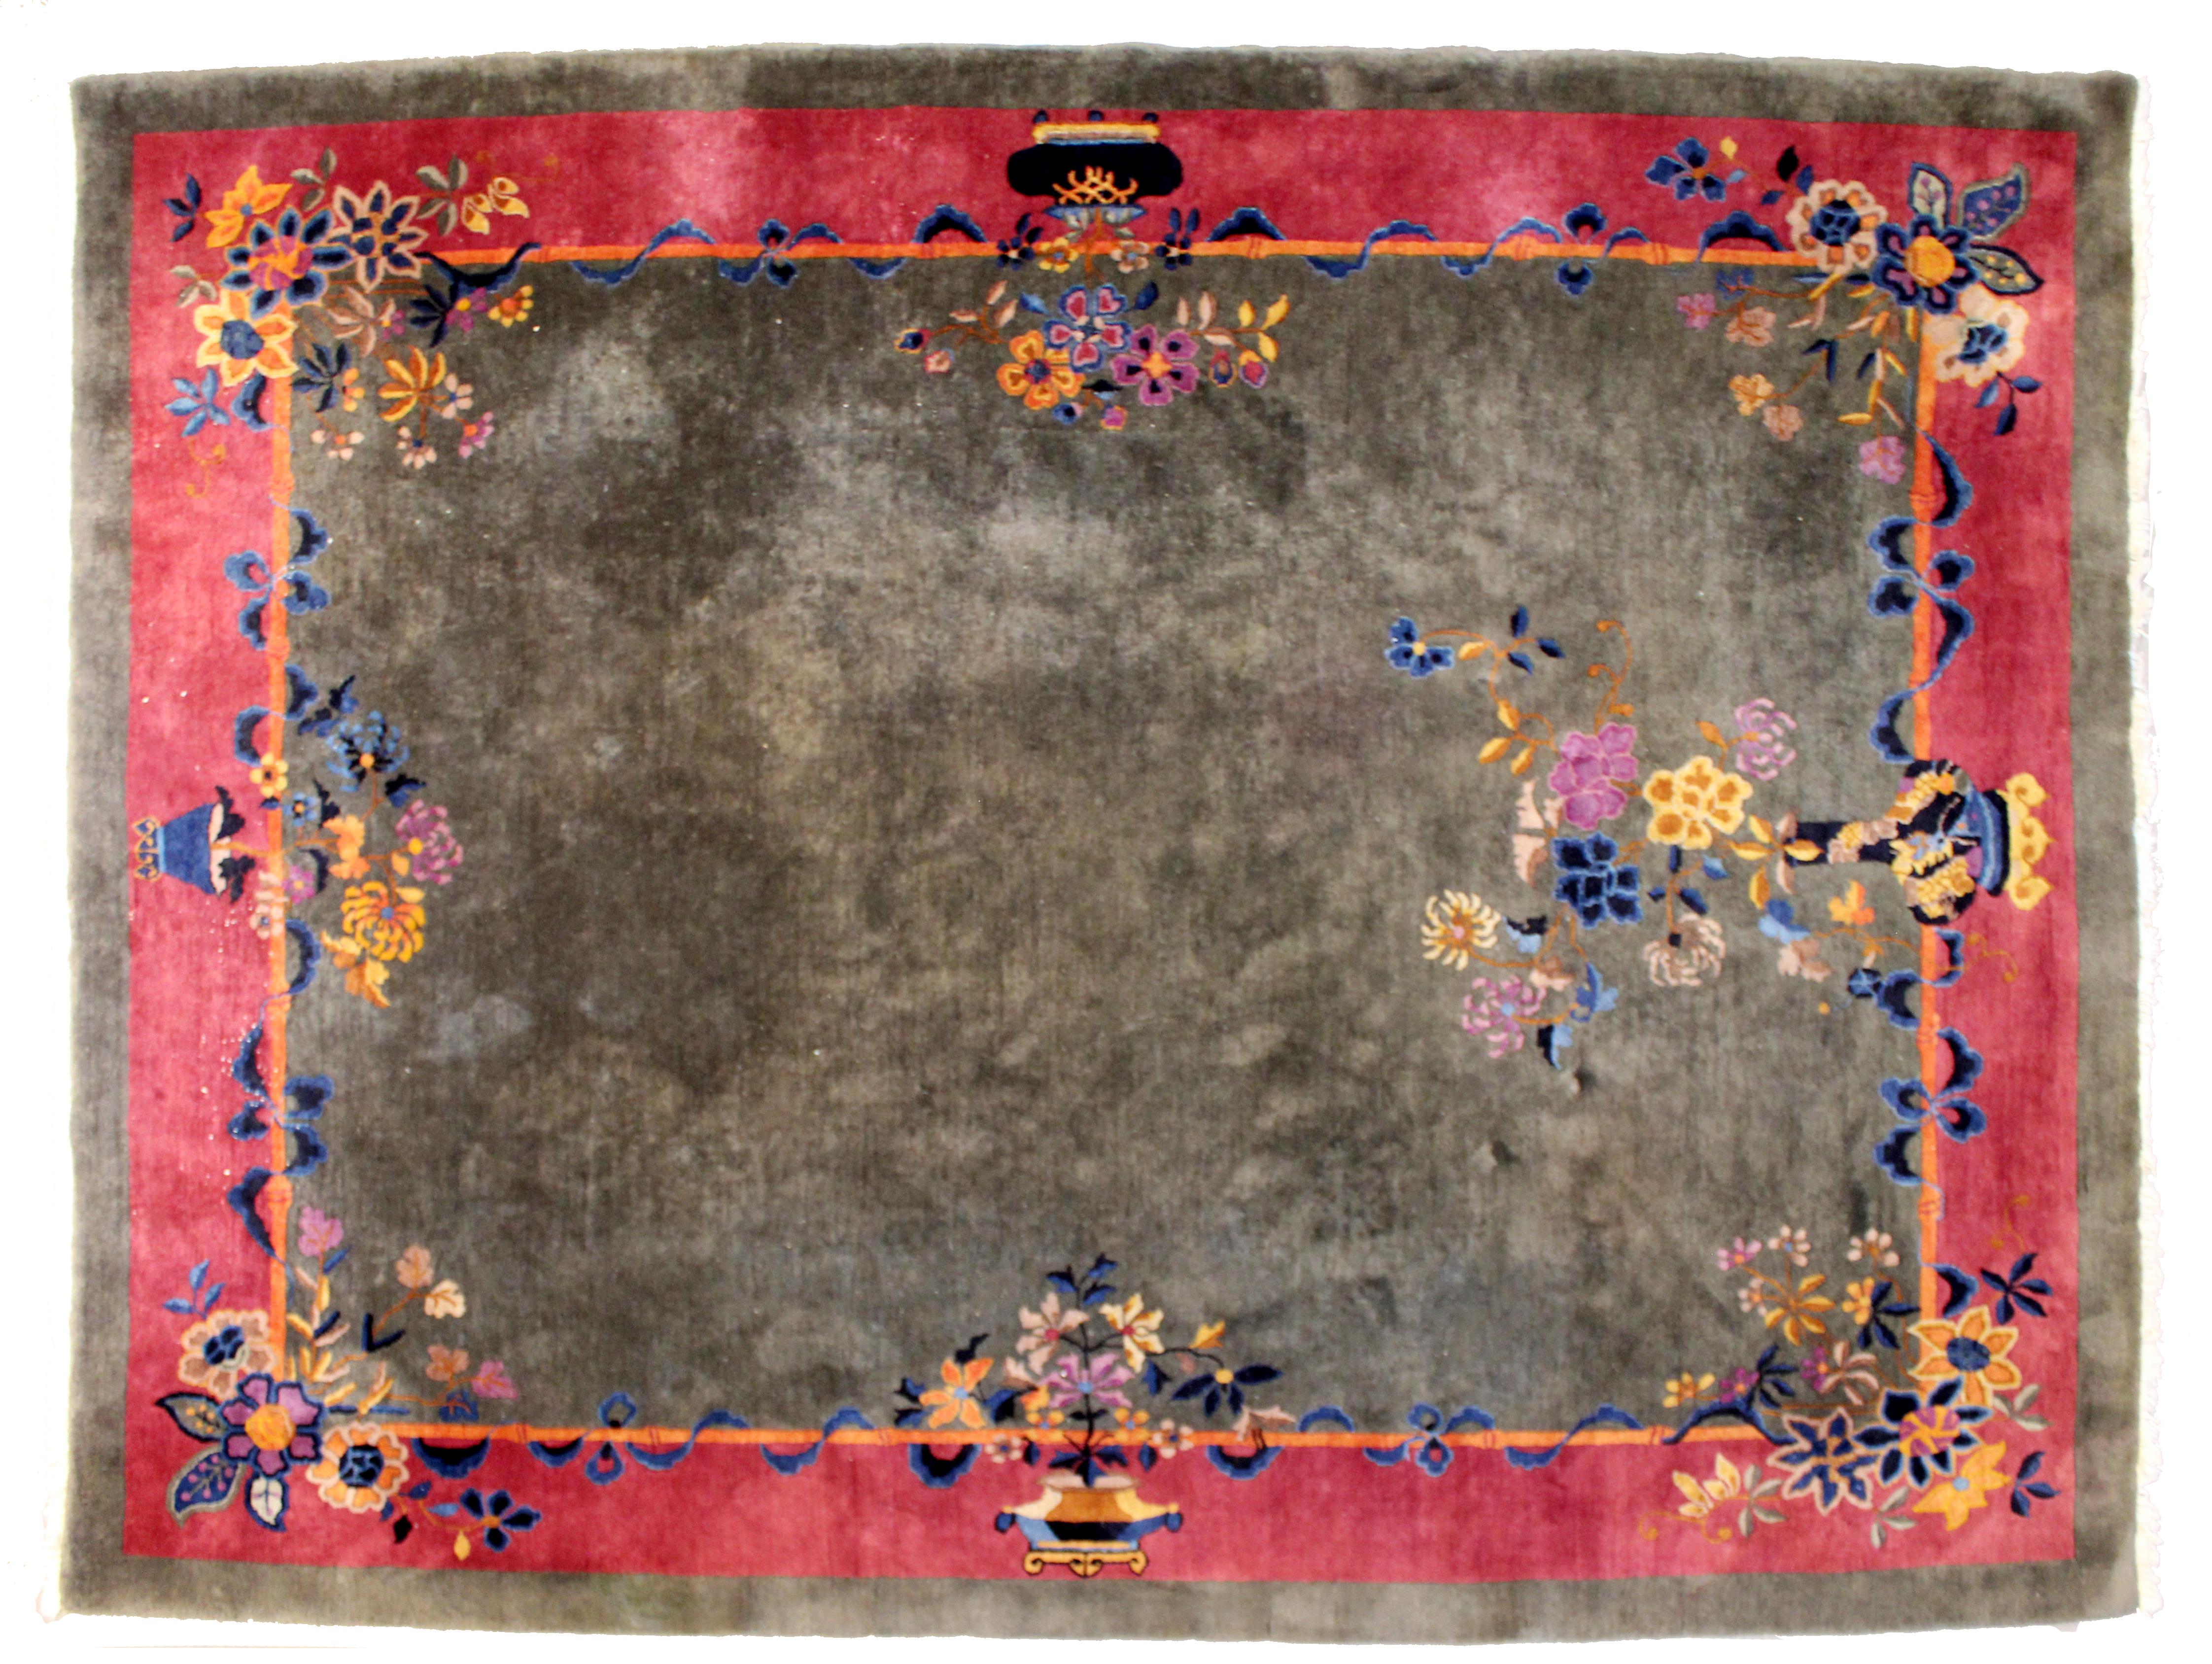 For your consideration is a gorgeous, rectangular, floral patterned area rug or carpet, by Nichols. In very good antique condition. The dimensions are 116